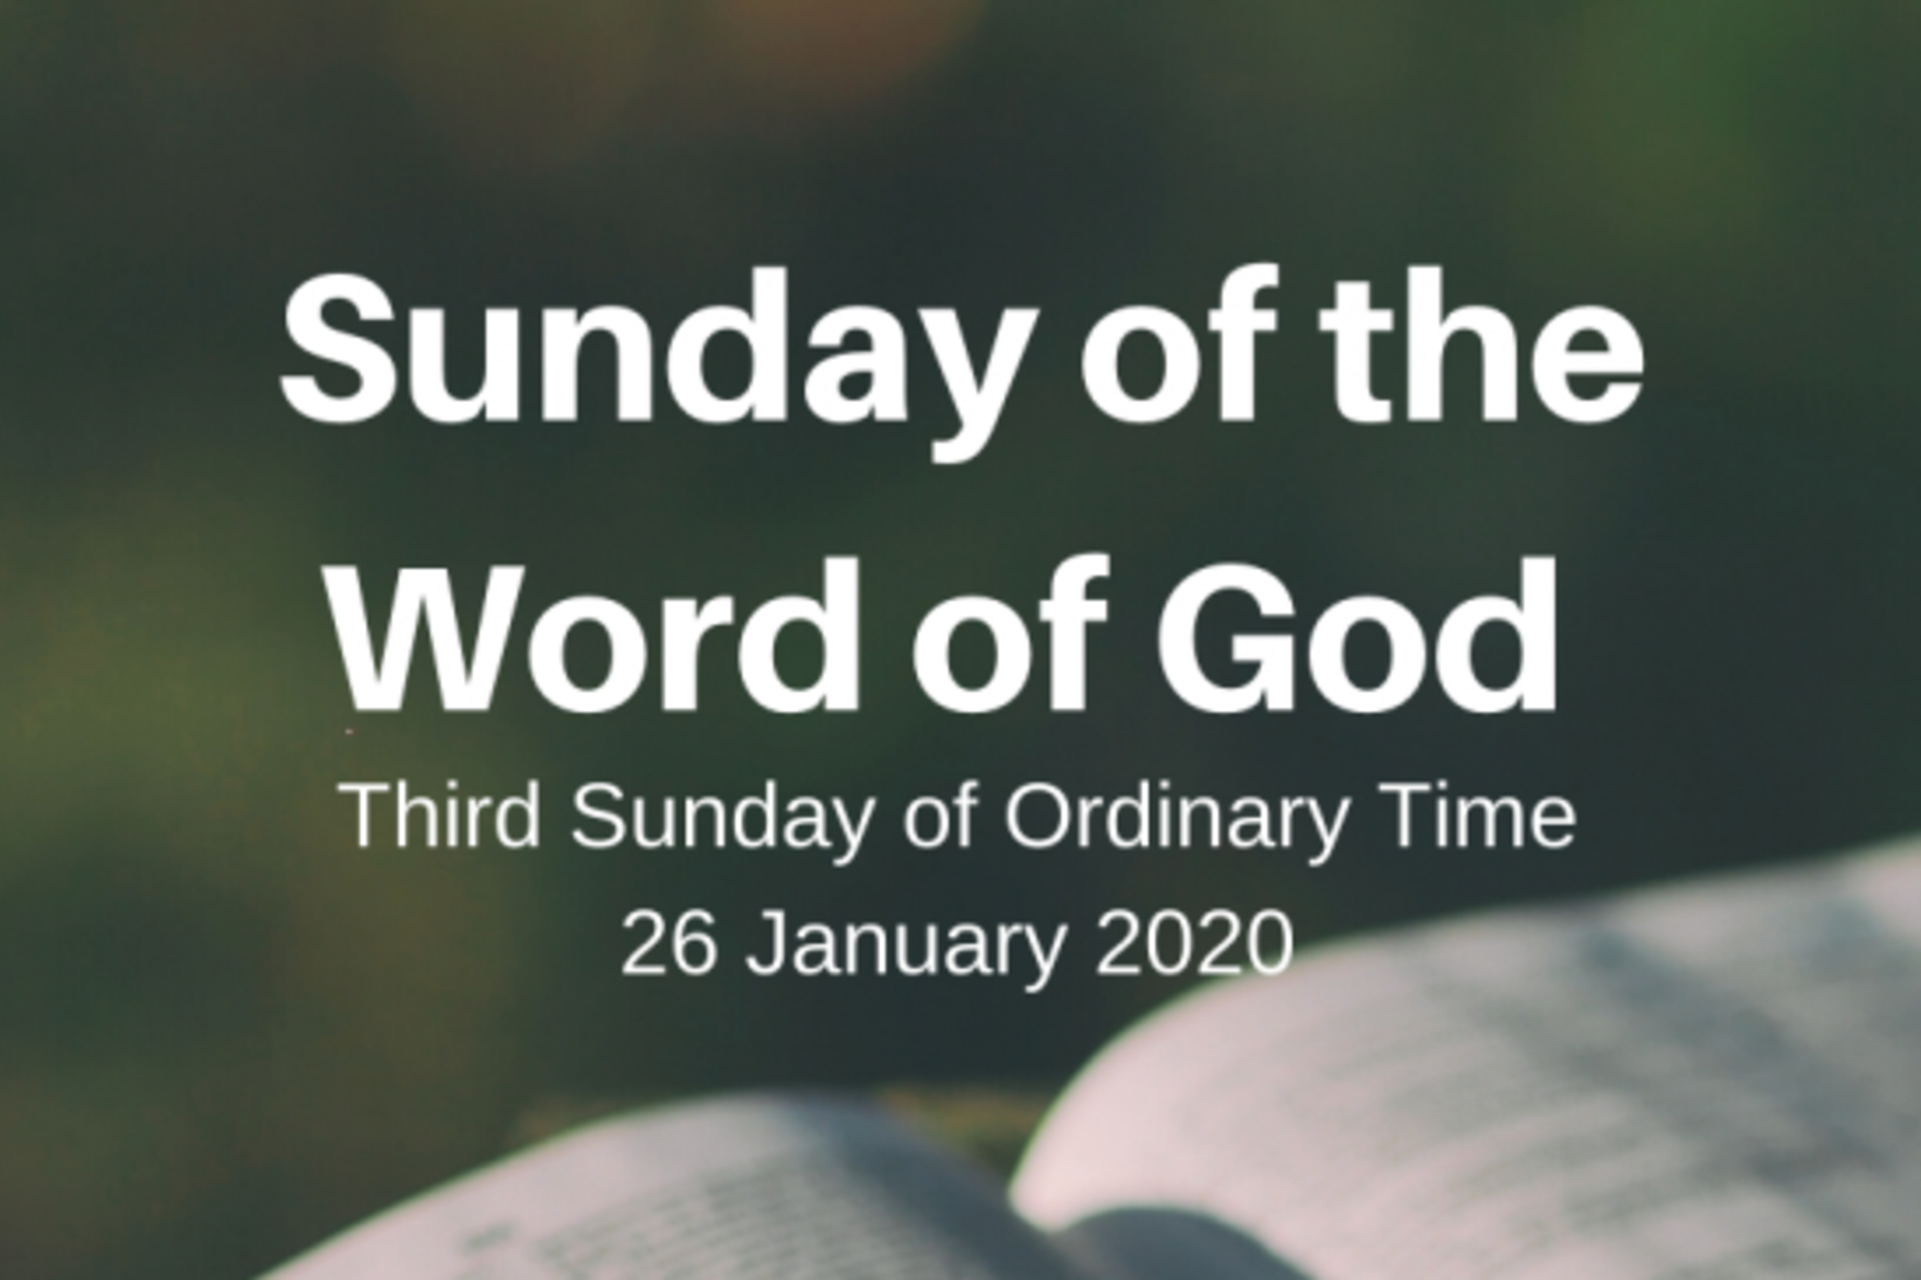 Resources for 'Sunday of the Word of God'